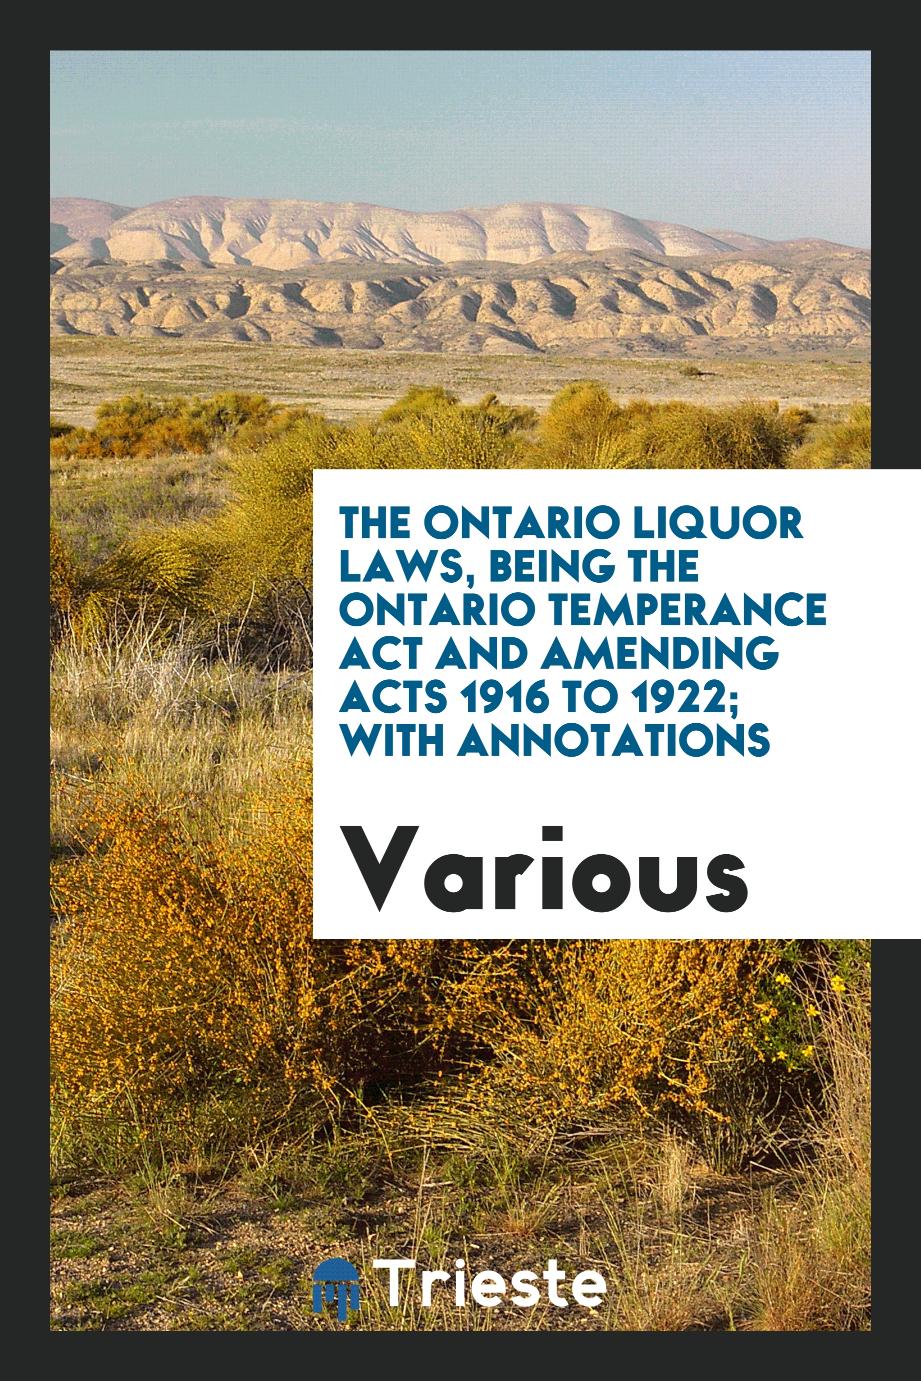 The Ontario liquor laws, being the Ontario Temperance Act and amending acts 1916 to 1922; with annotations